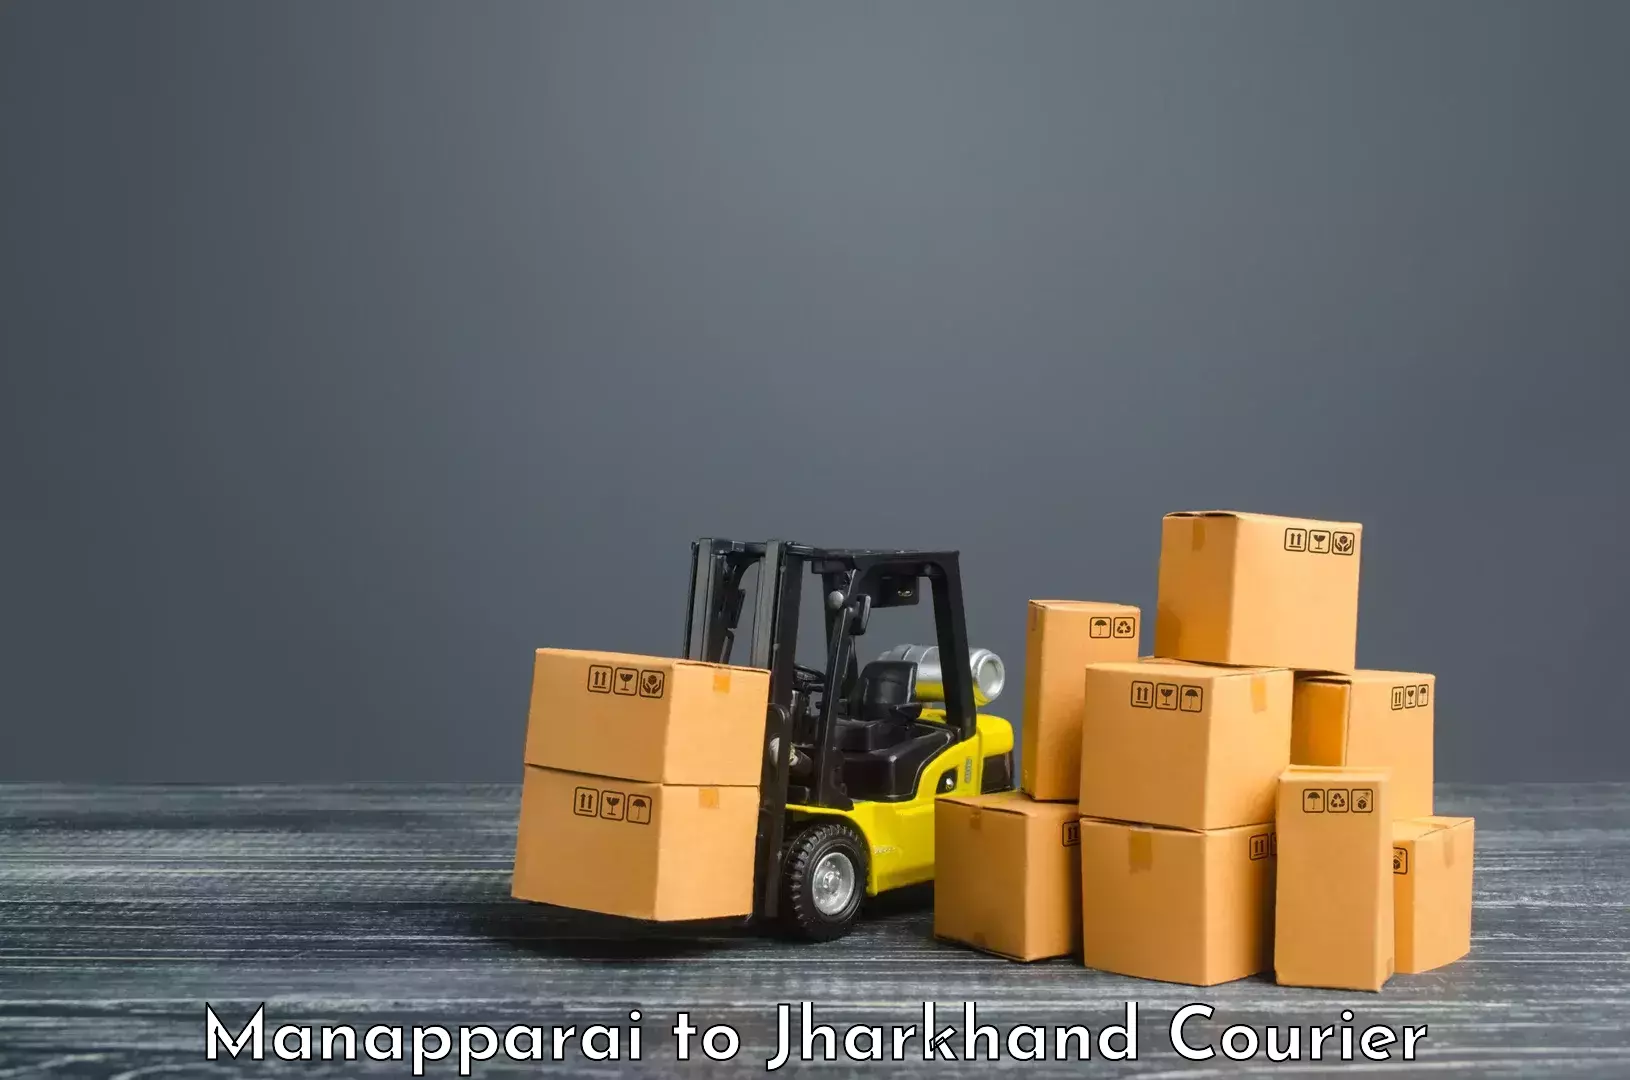 Reliable courier service Manapparai to Jamshedpur